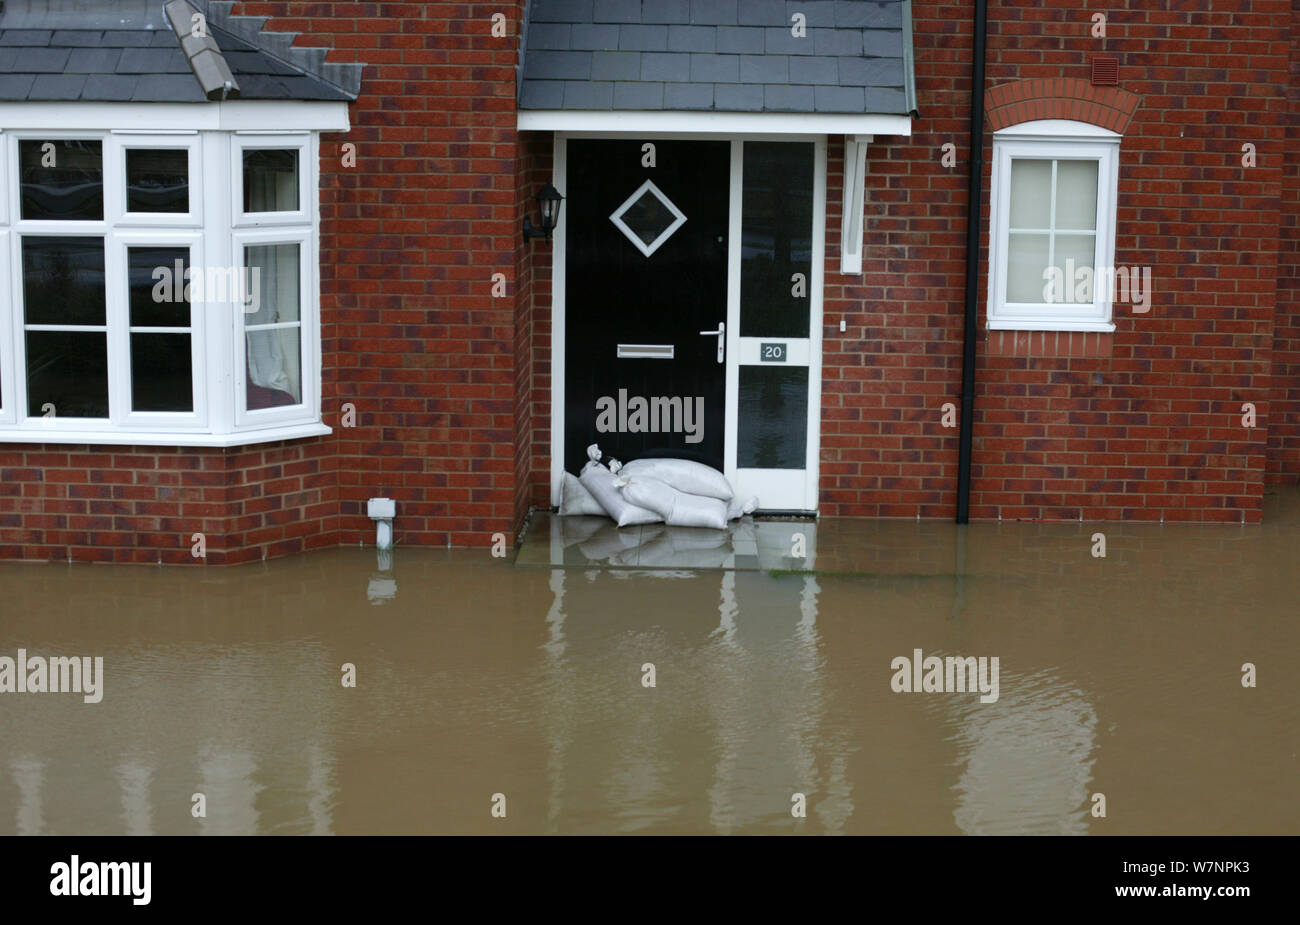 Flooding of newly built housing in the Glasdir estate, Ruthin, Vale of Clwyd, Denbighshire, Wales, UK.  This is an area at risk of flooding and therefore difficult to obtain House insurance. 27/11/ 2012 Stock Photo